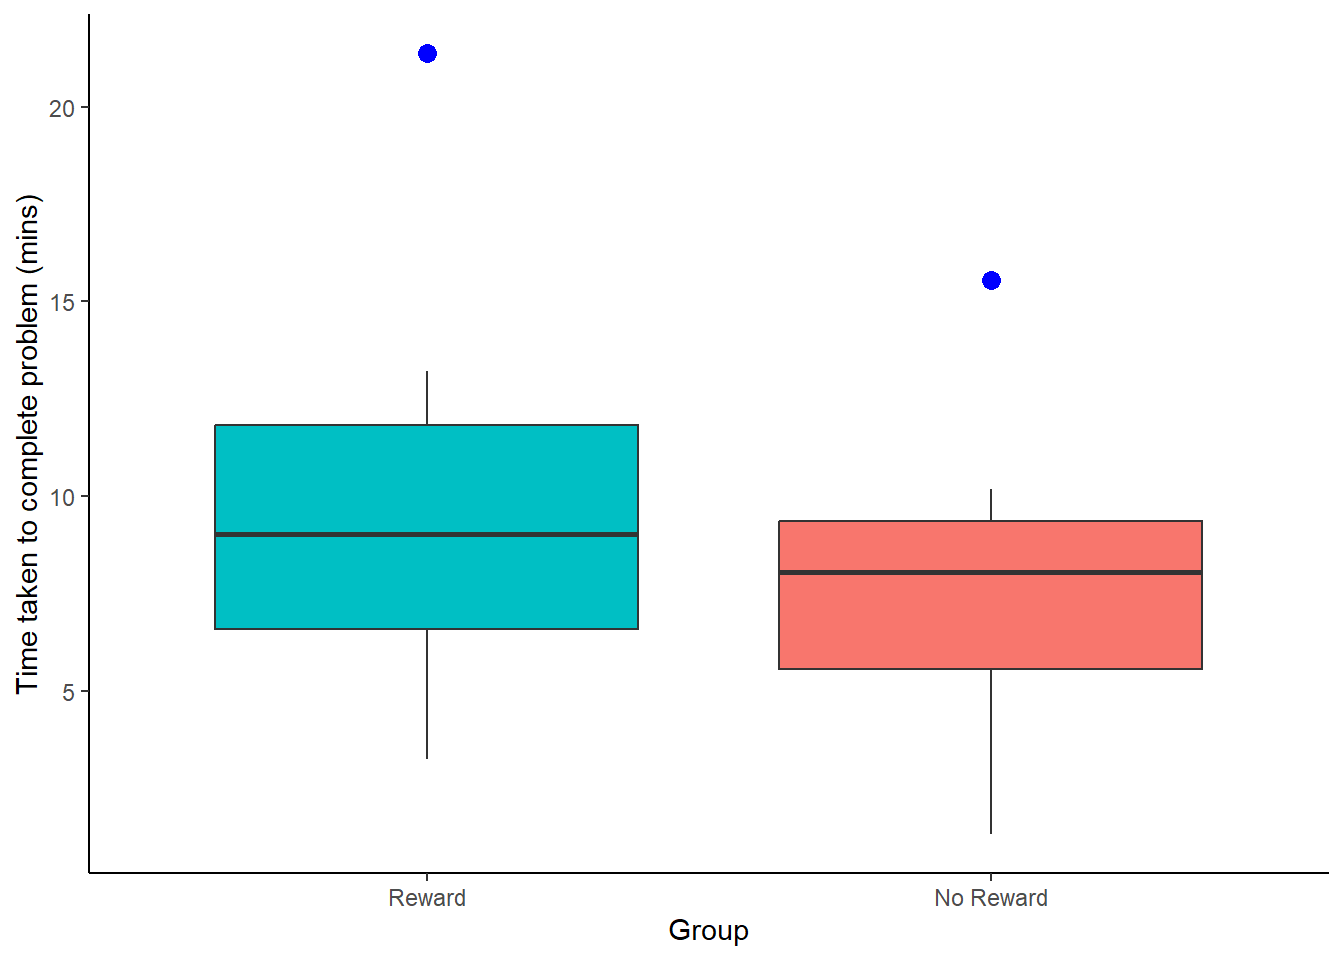 Boxplots showing the time taken to solve the puzzle for the two conditions, Reward vs No Reward. Outliers are represented by solid blue dots.